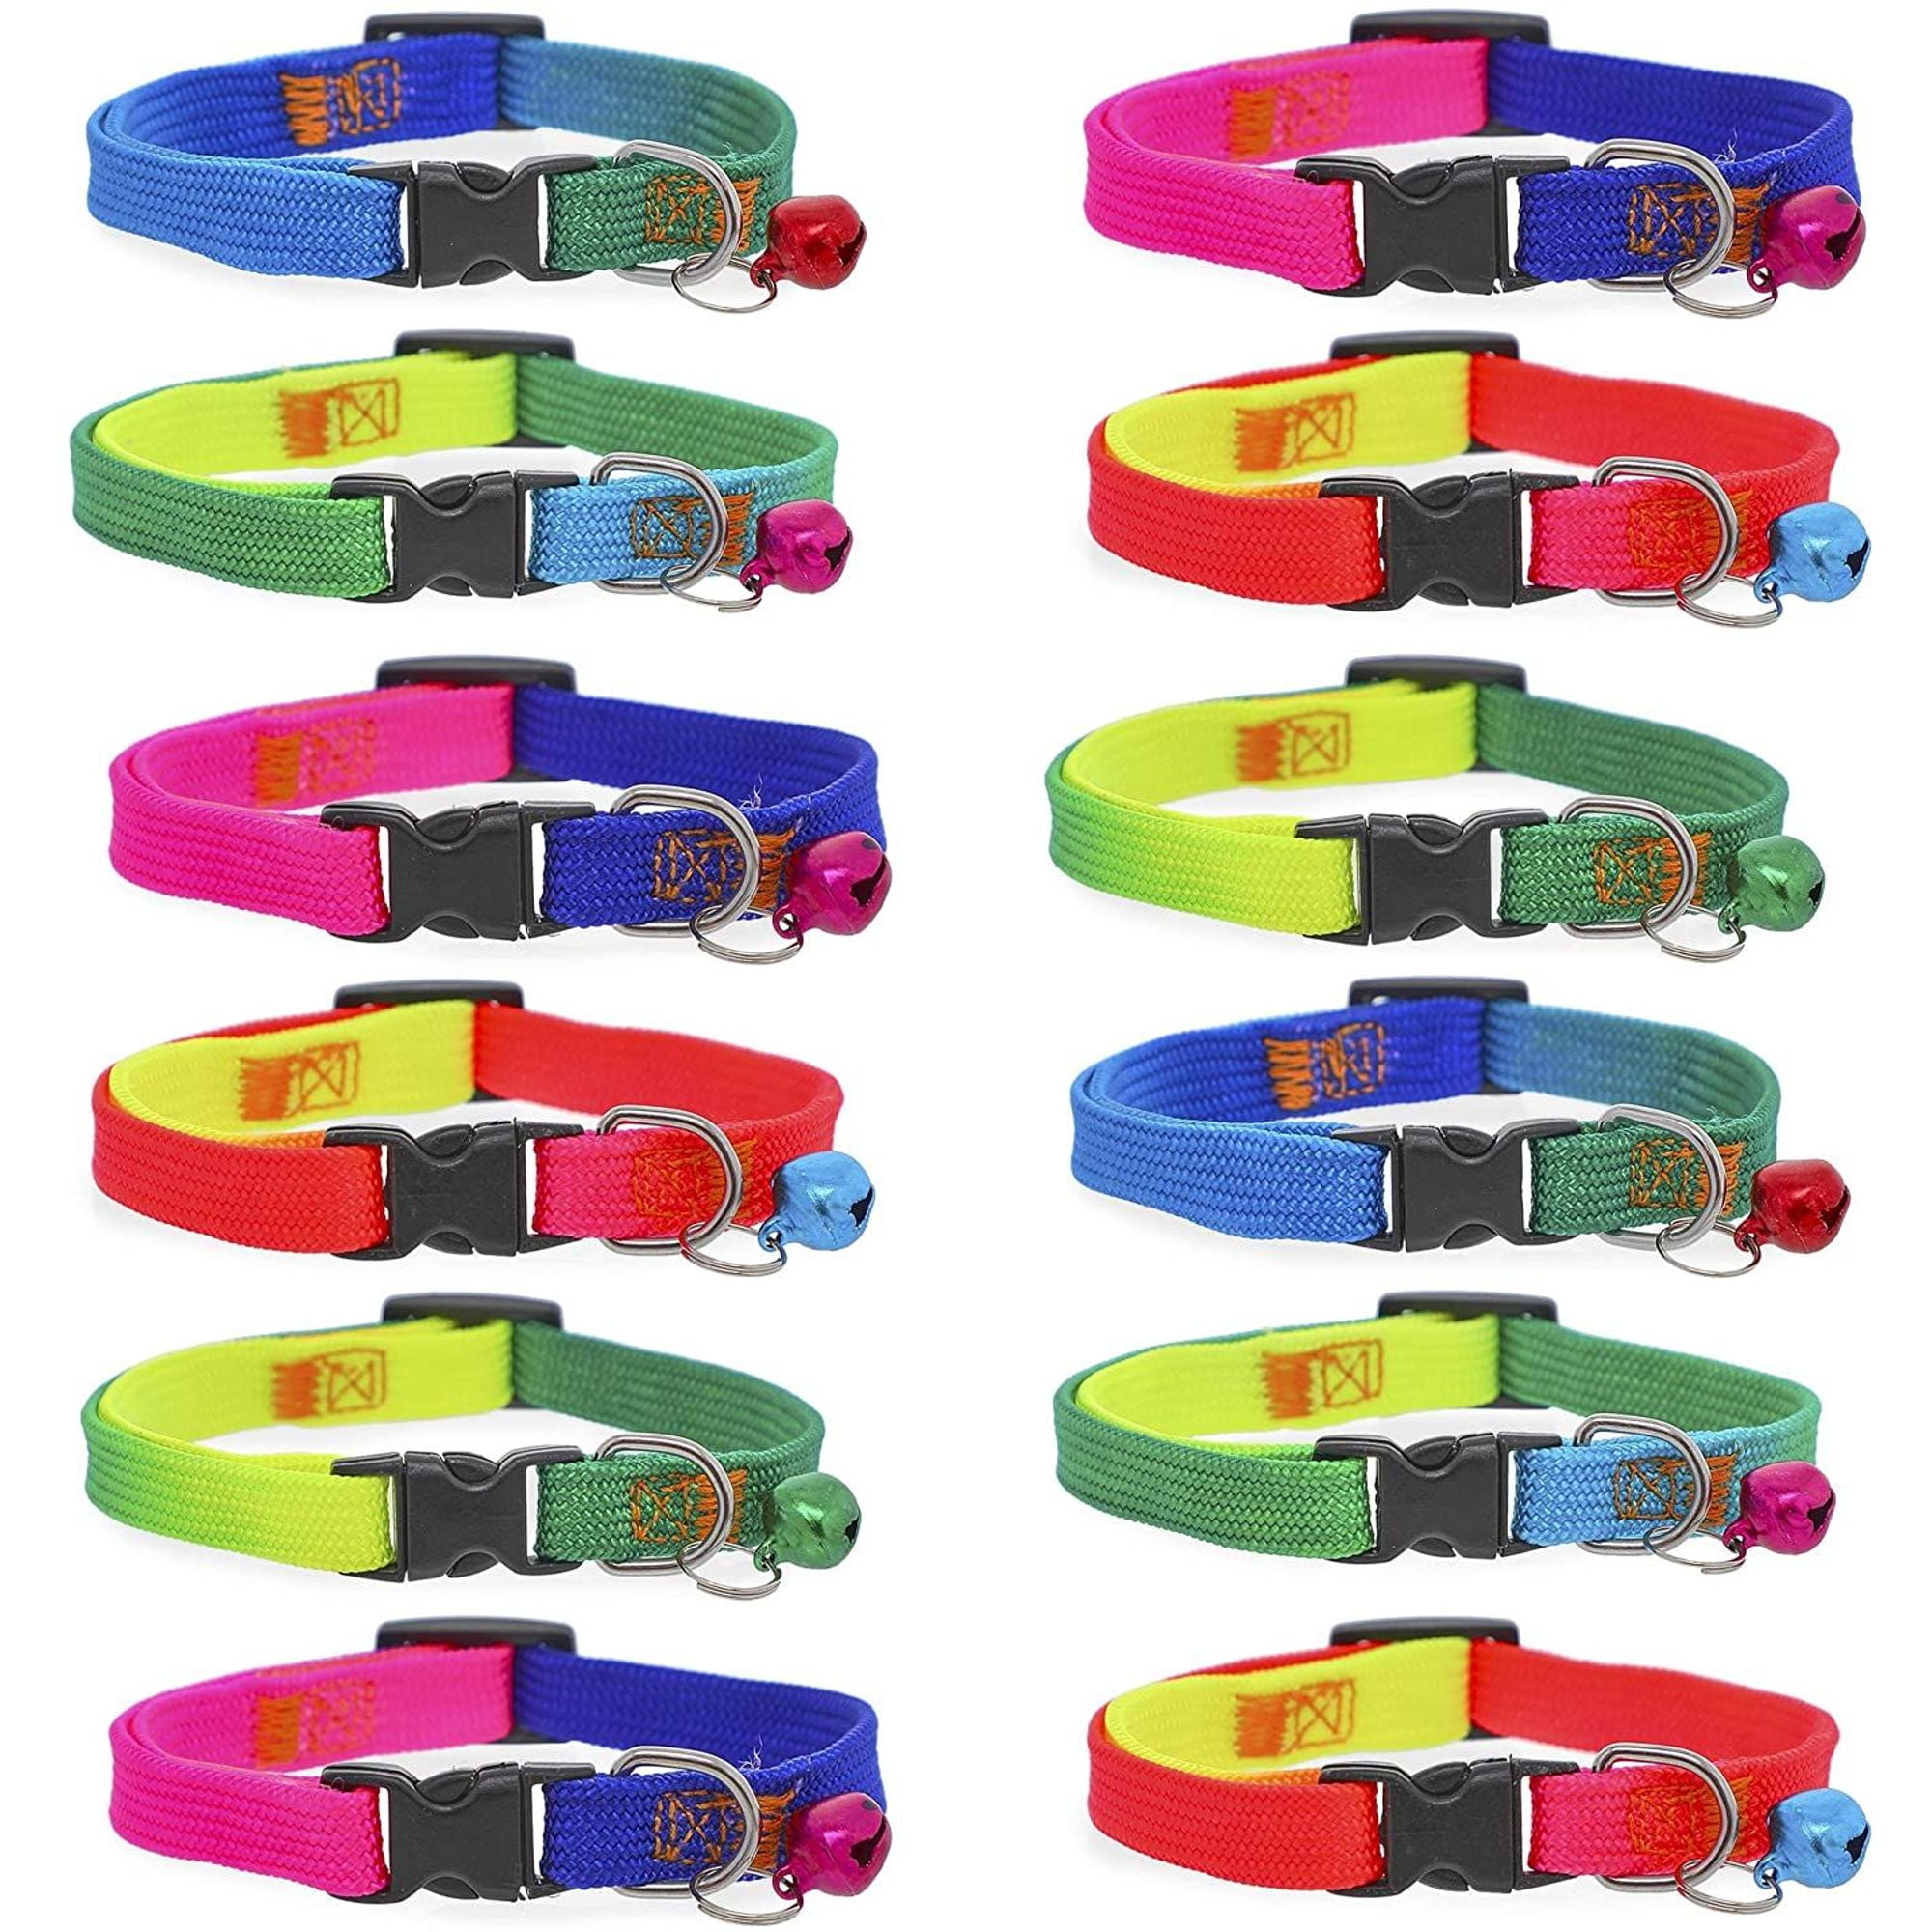 5pcs/lot Cat Breakaway Collars with Bell Quick Release Safety Buckle for Kitten 